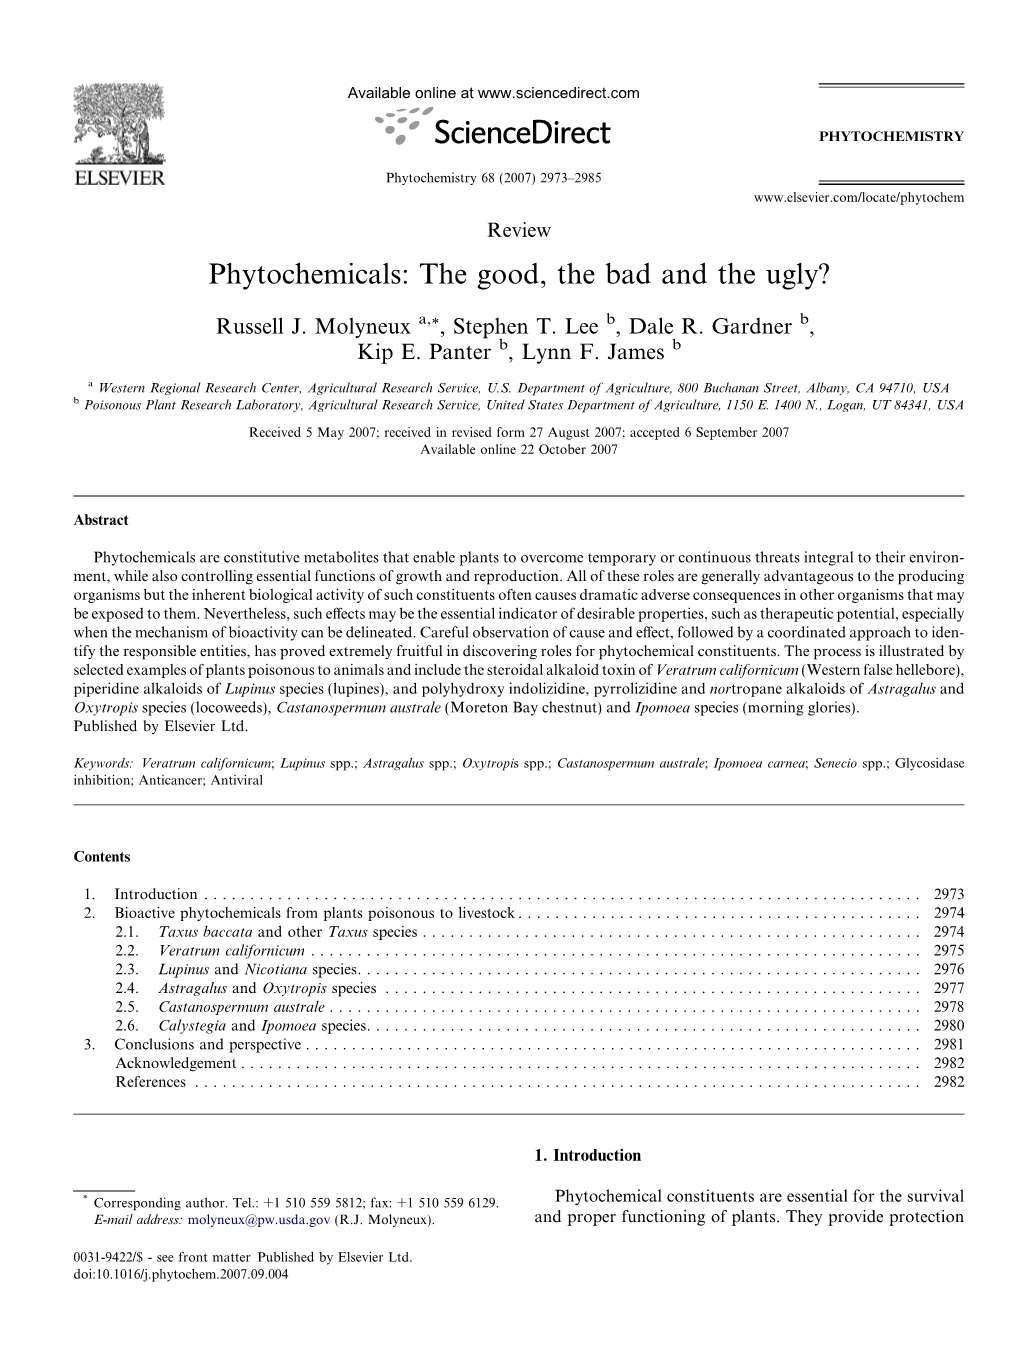 Phytochemicals: the Good, the Bad and the Ugly?